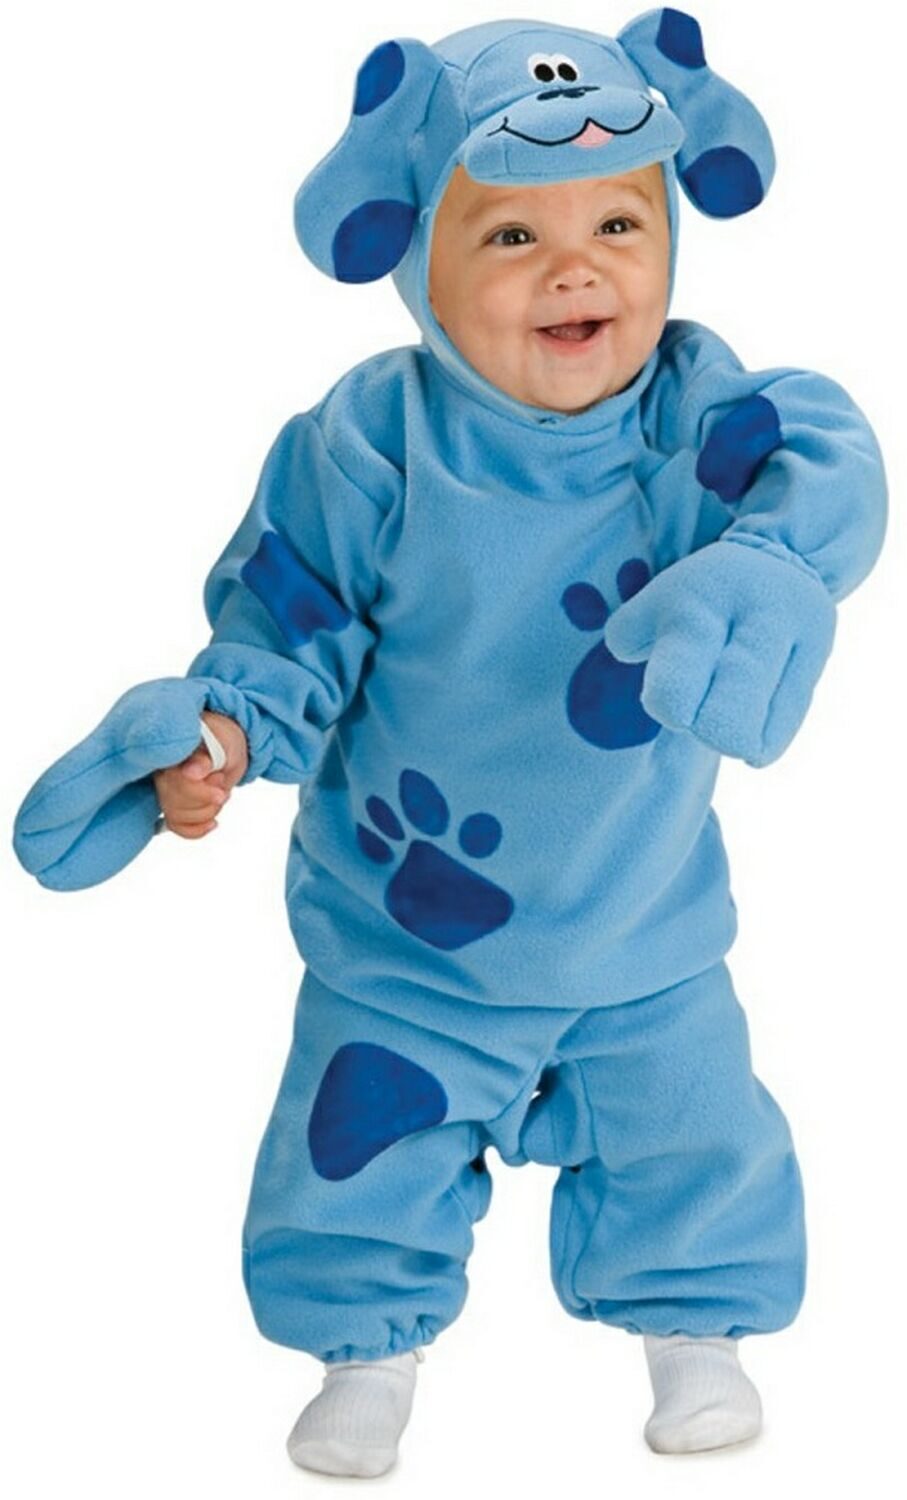 Image result for blues clues costume